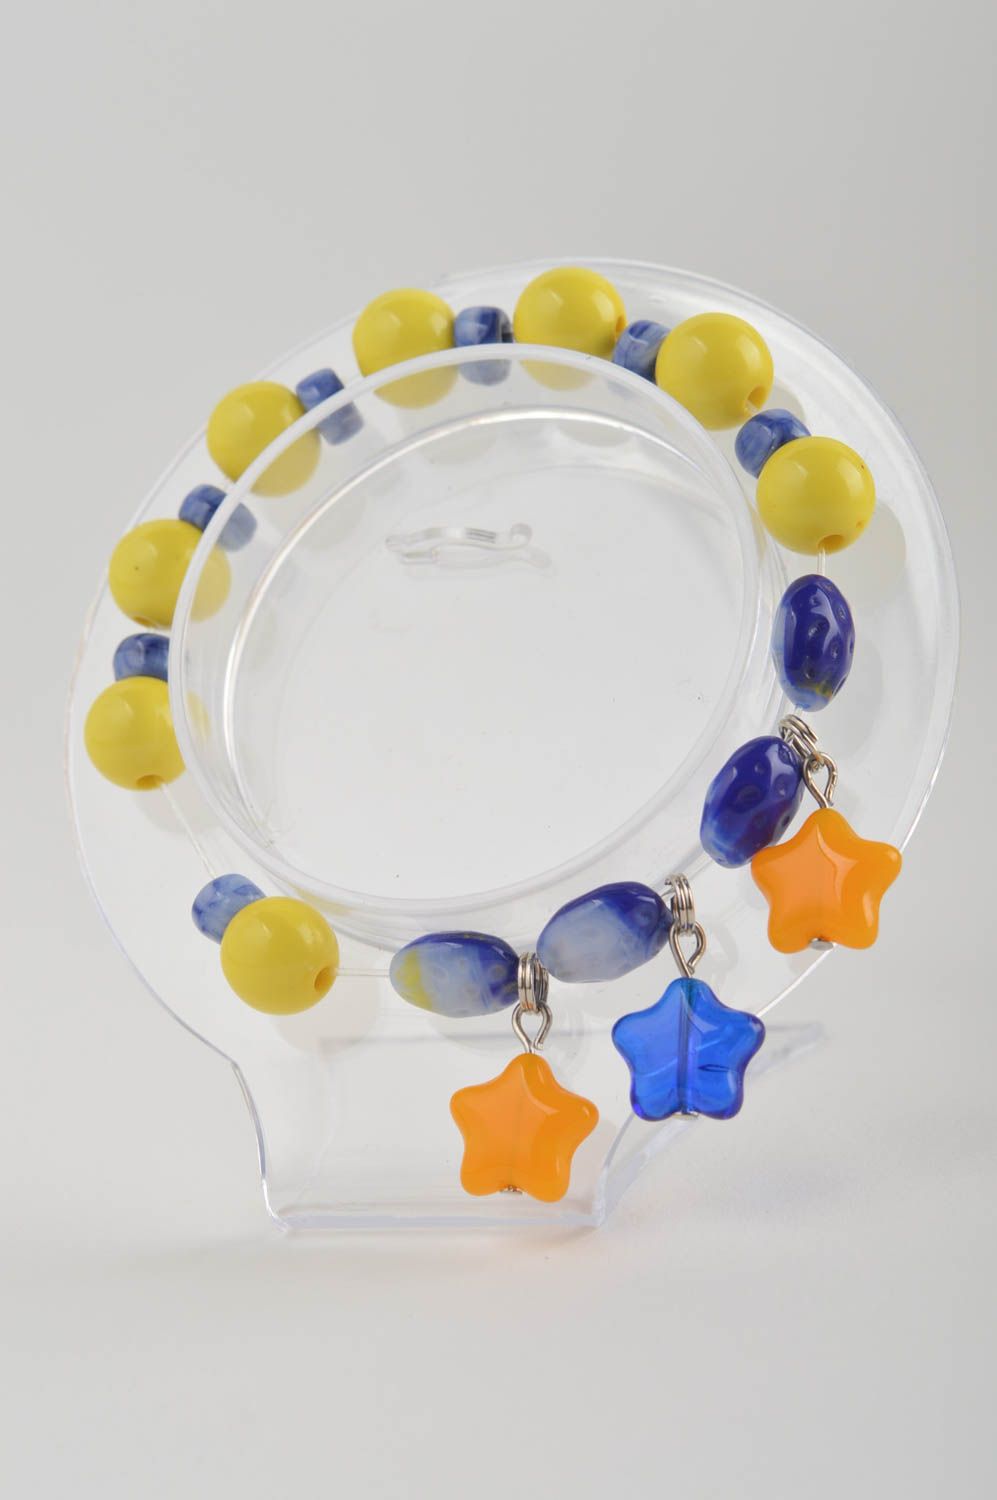 Yellow and blue beads bracelet on elastic cord cute with orange charms for girls  photo 3